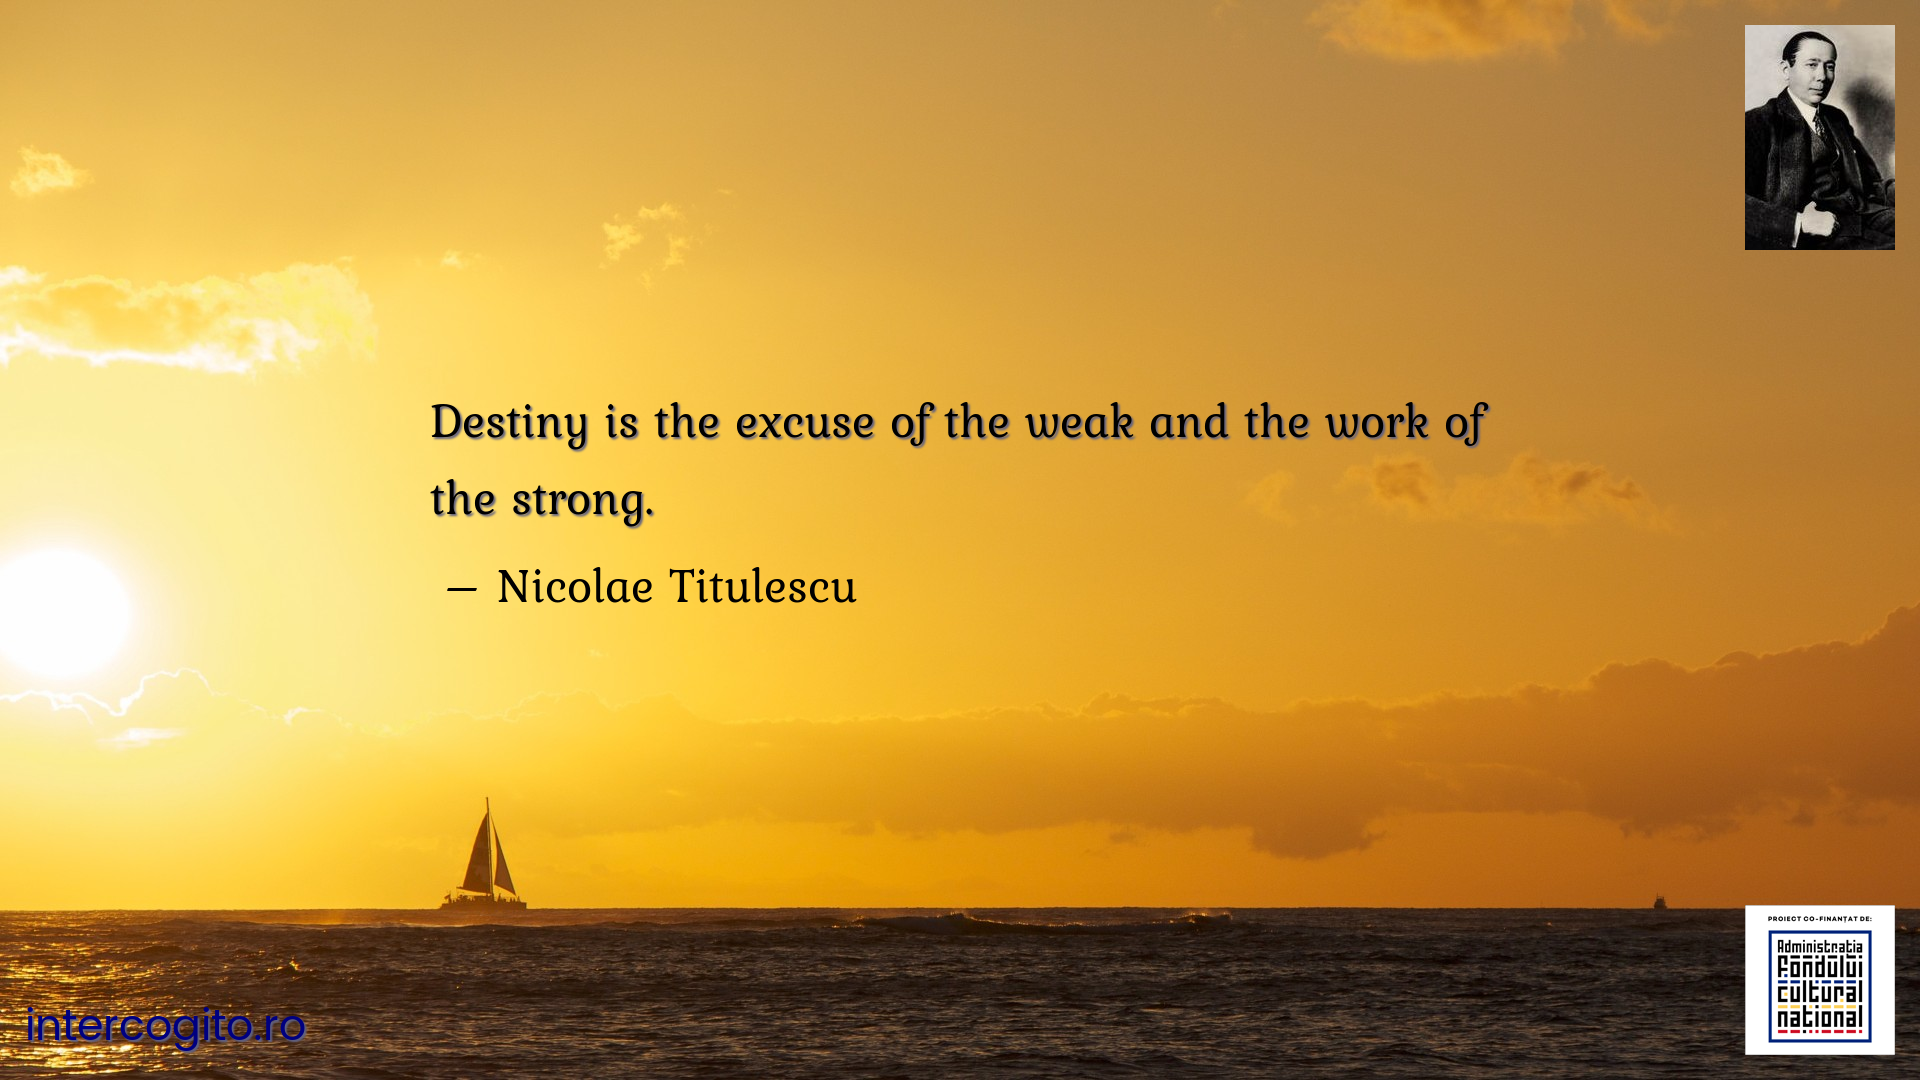 Destiny is the excuse of the weak and the work of the strong.